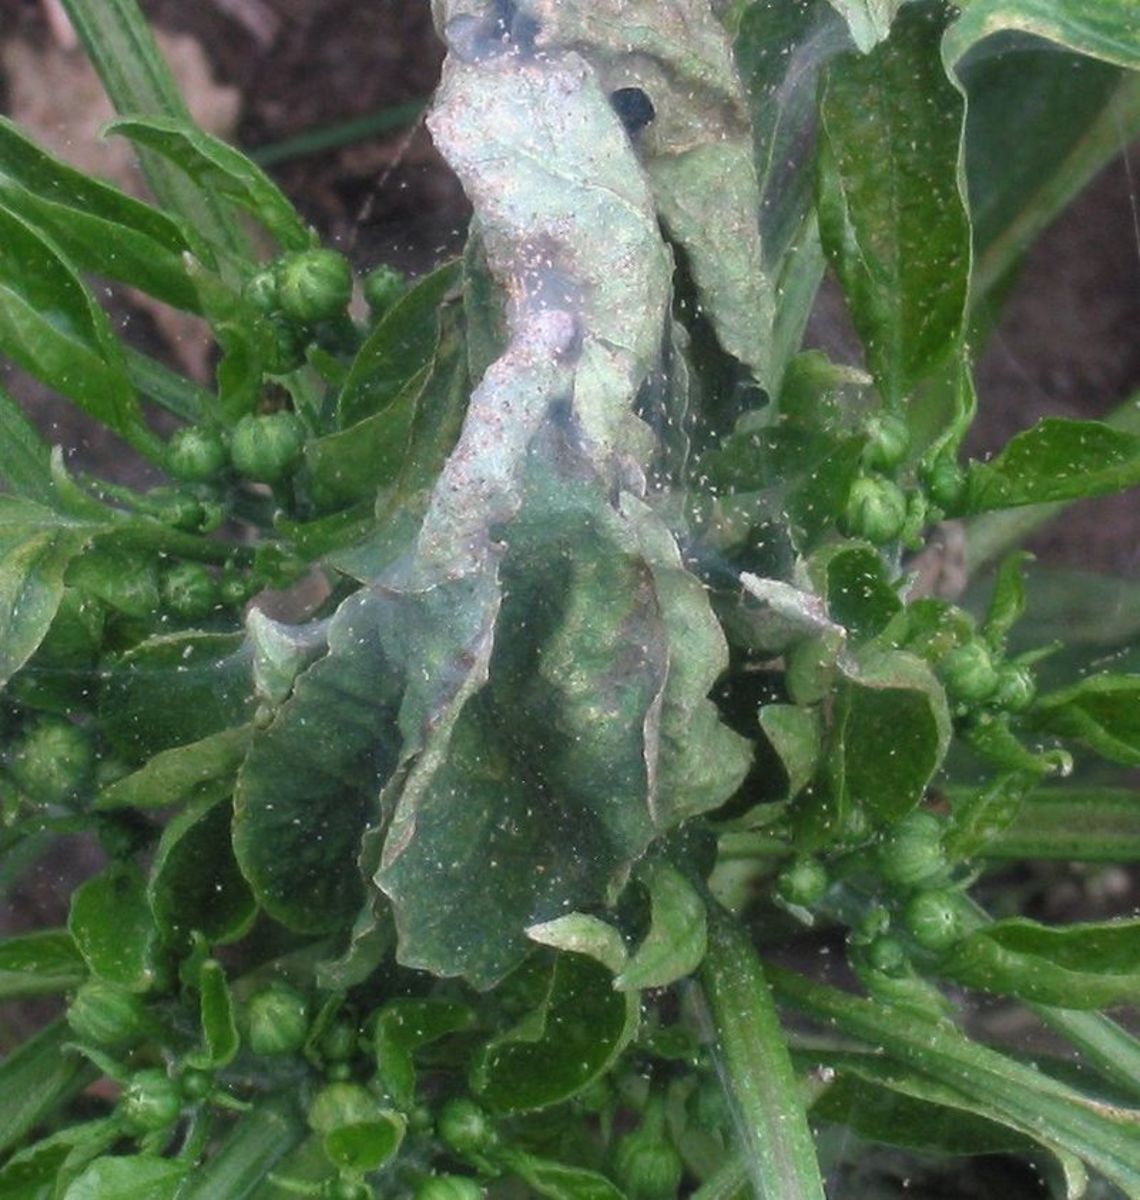 Curled leaves and webs are another indication of a spider mite infestation